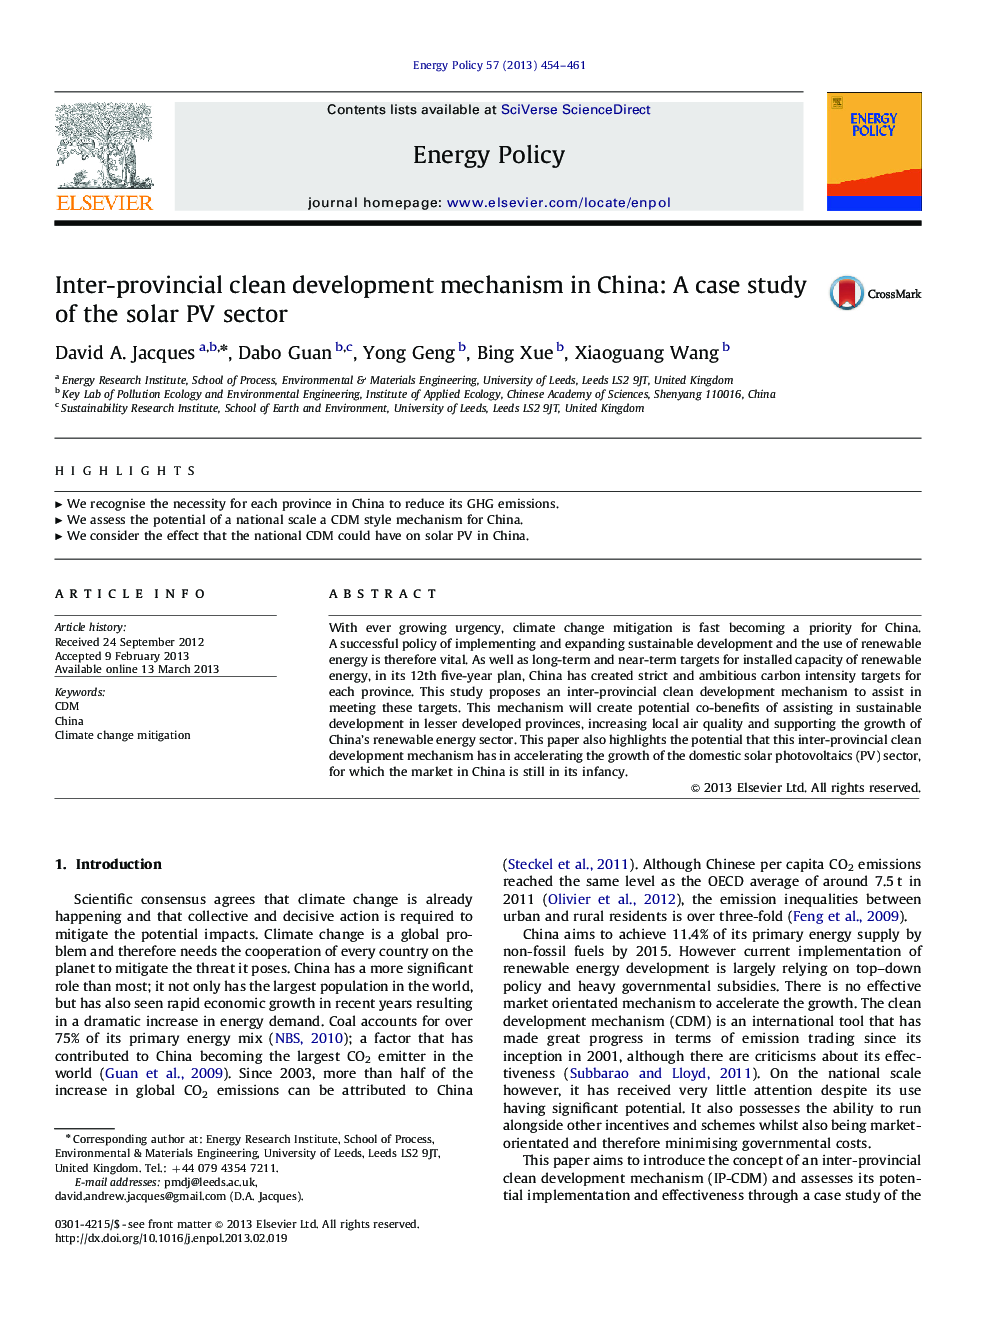 Inter-provincial clean development mechanism in China: A case study of the solar PV sector